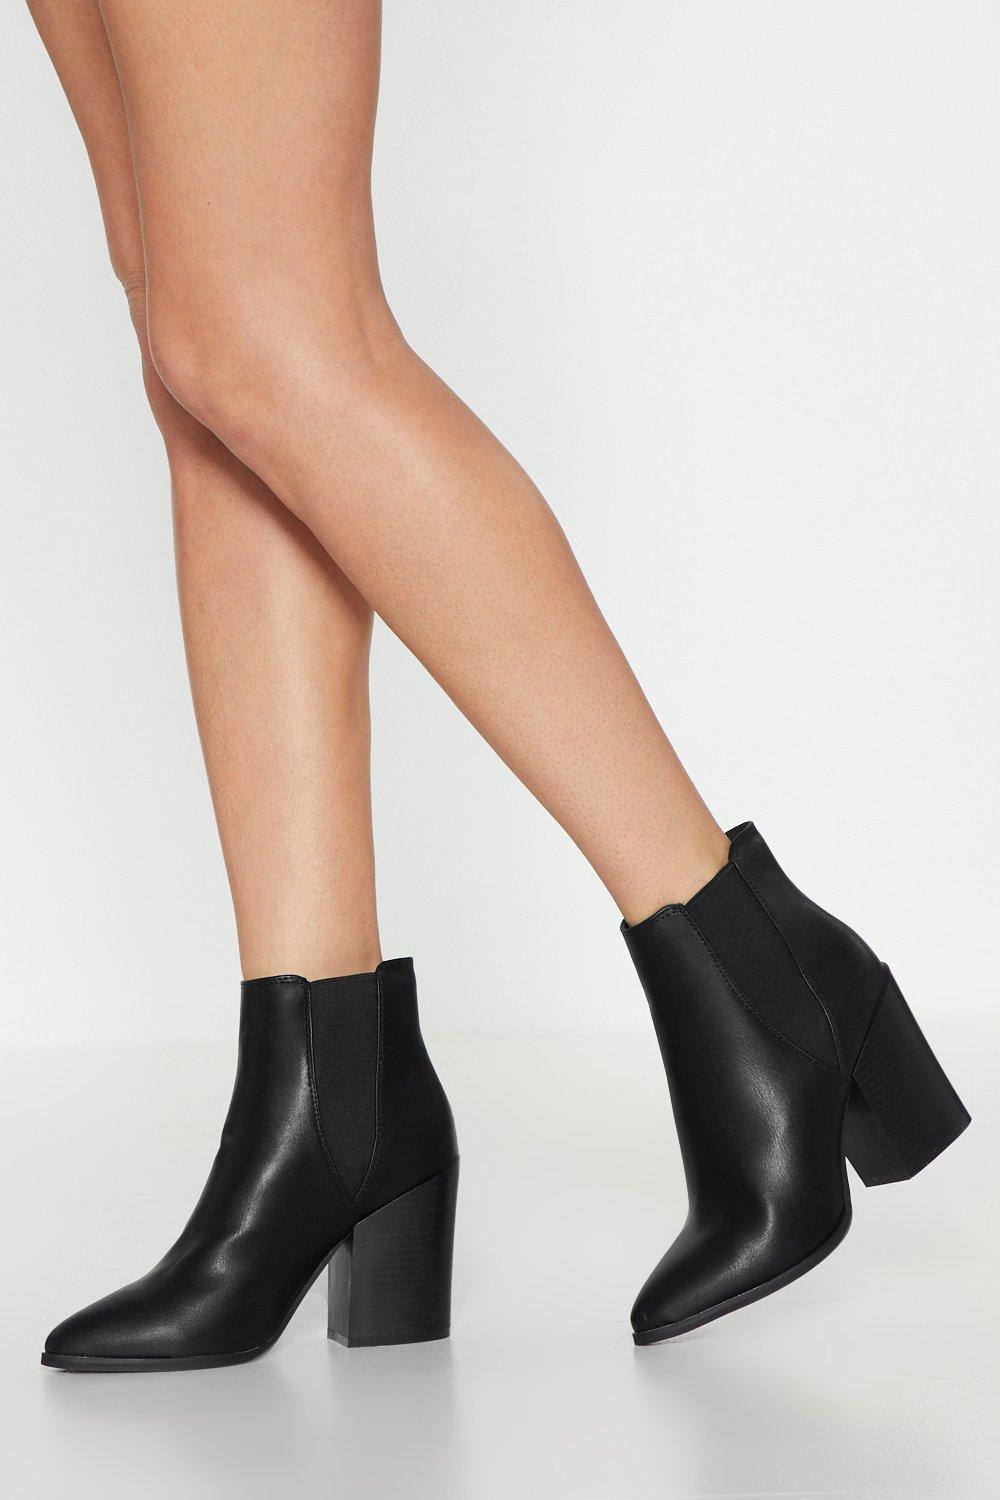 louis wedge boot